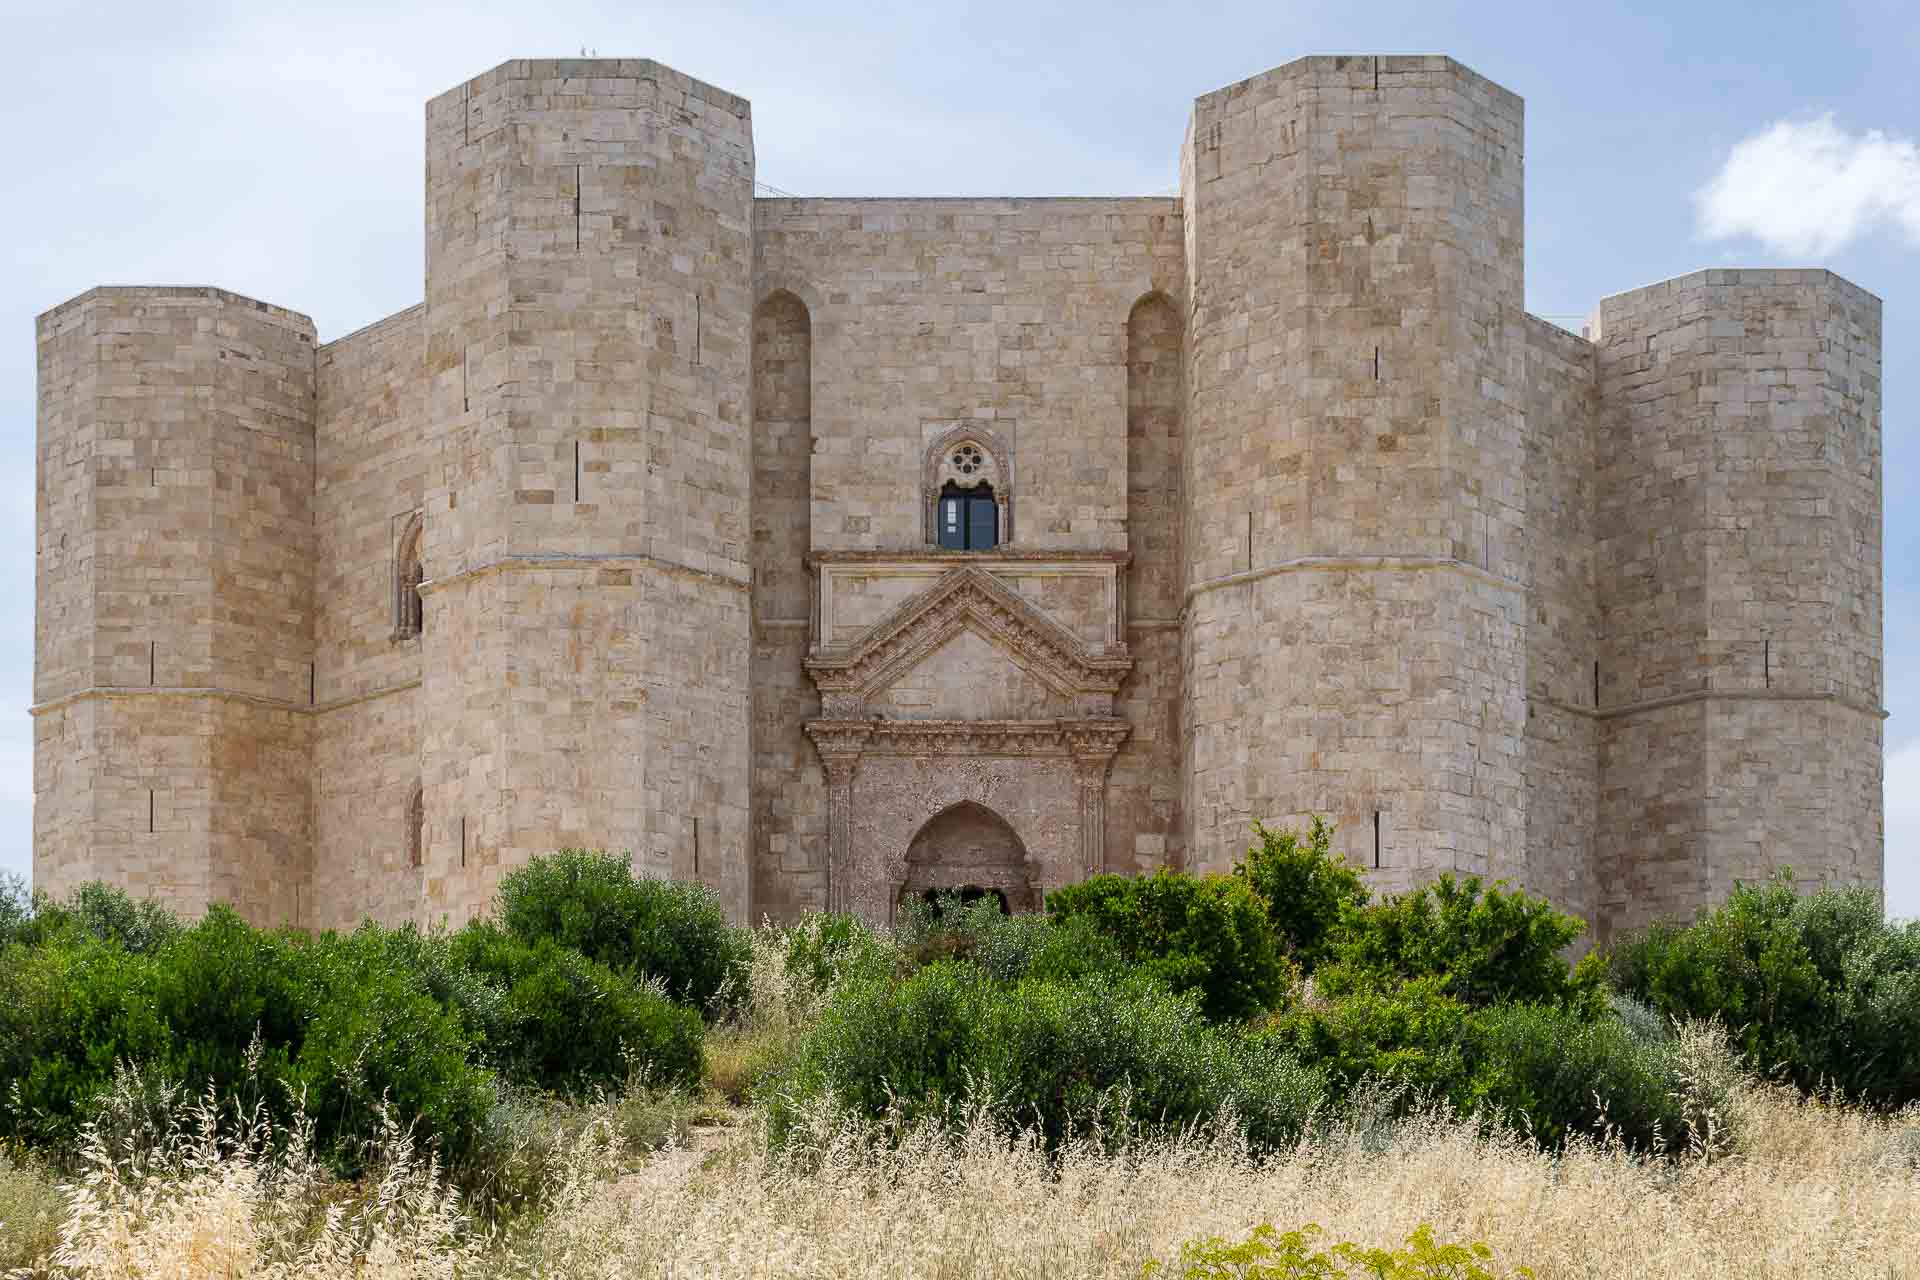 The Castel Del Monte with octagon towers